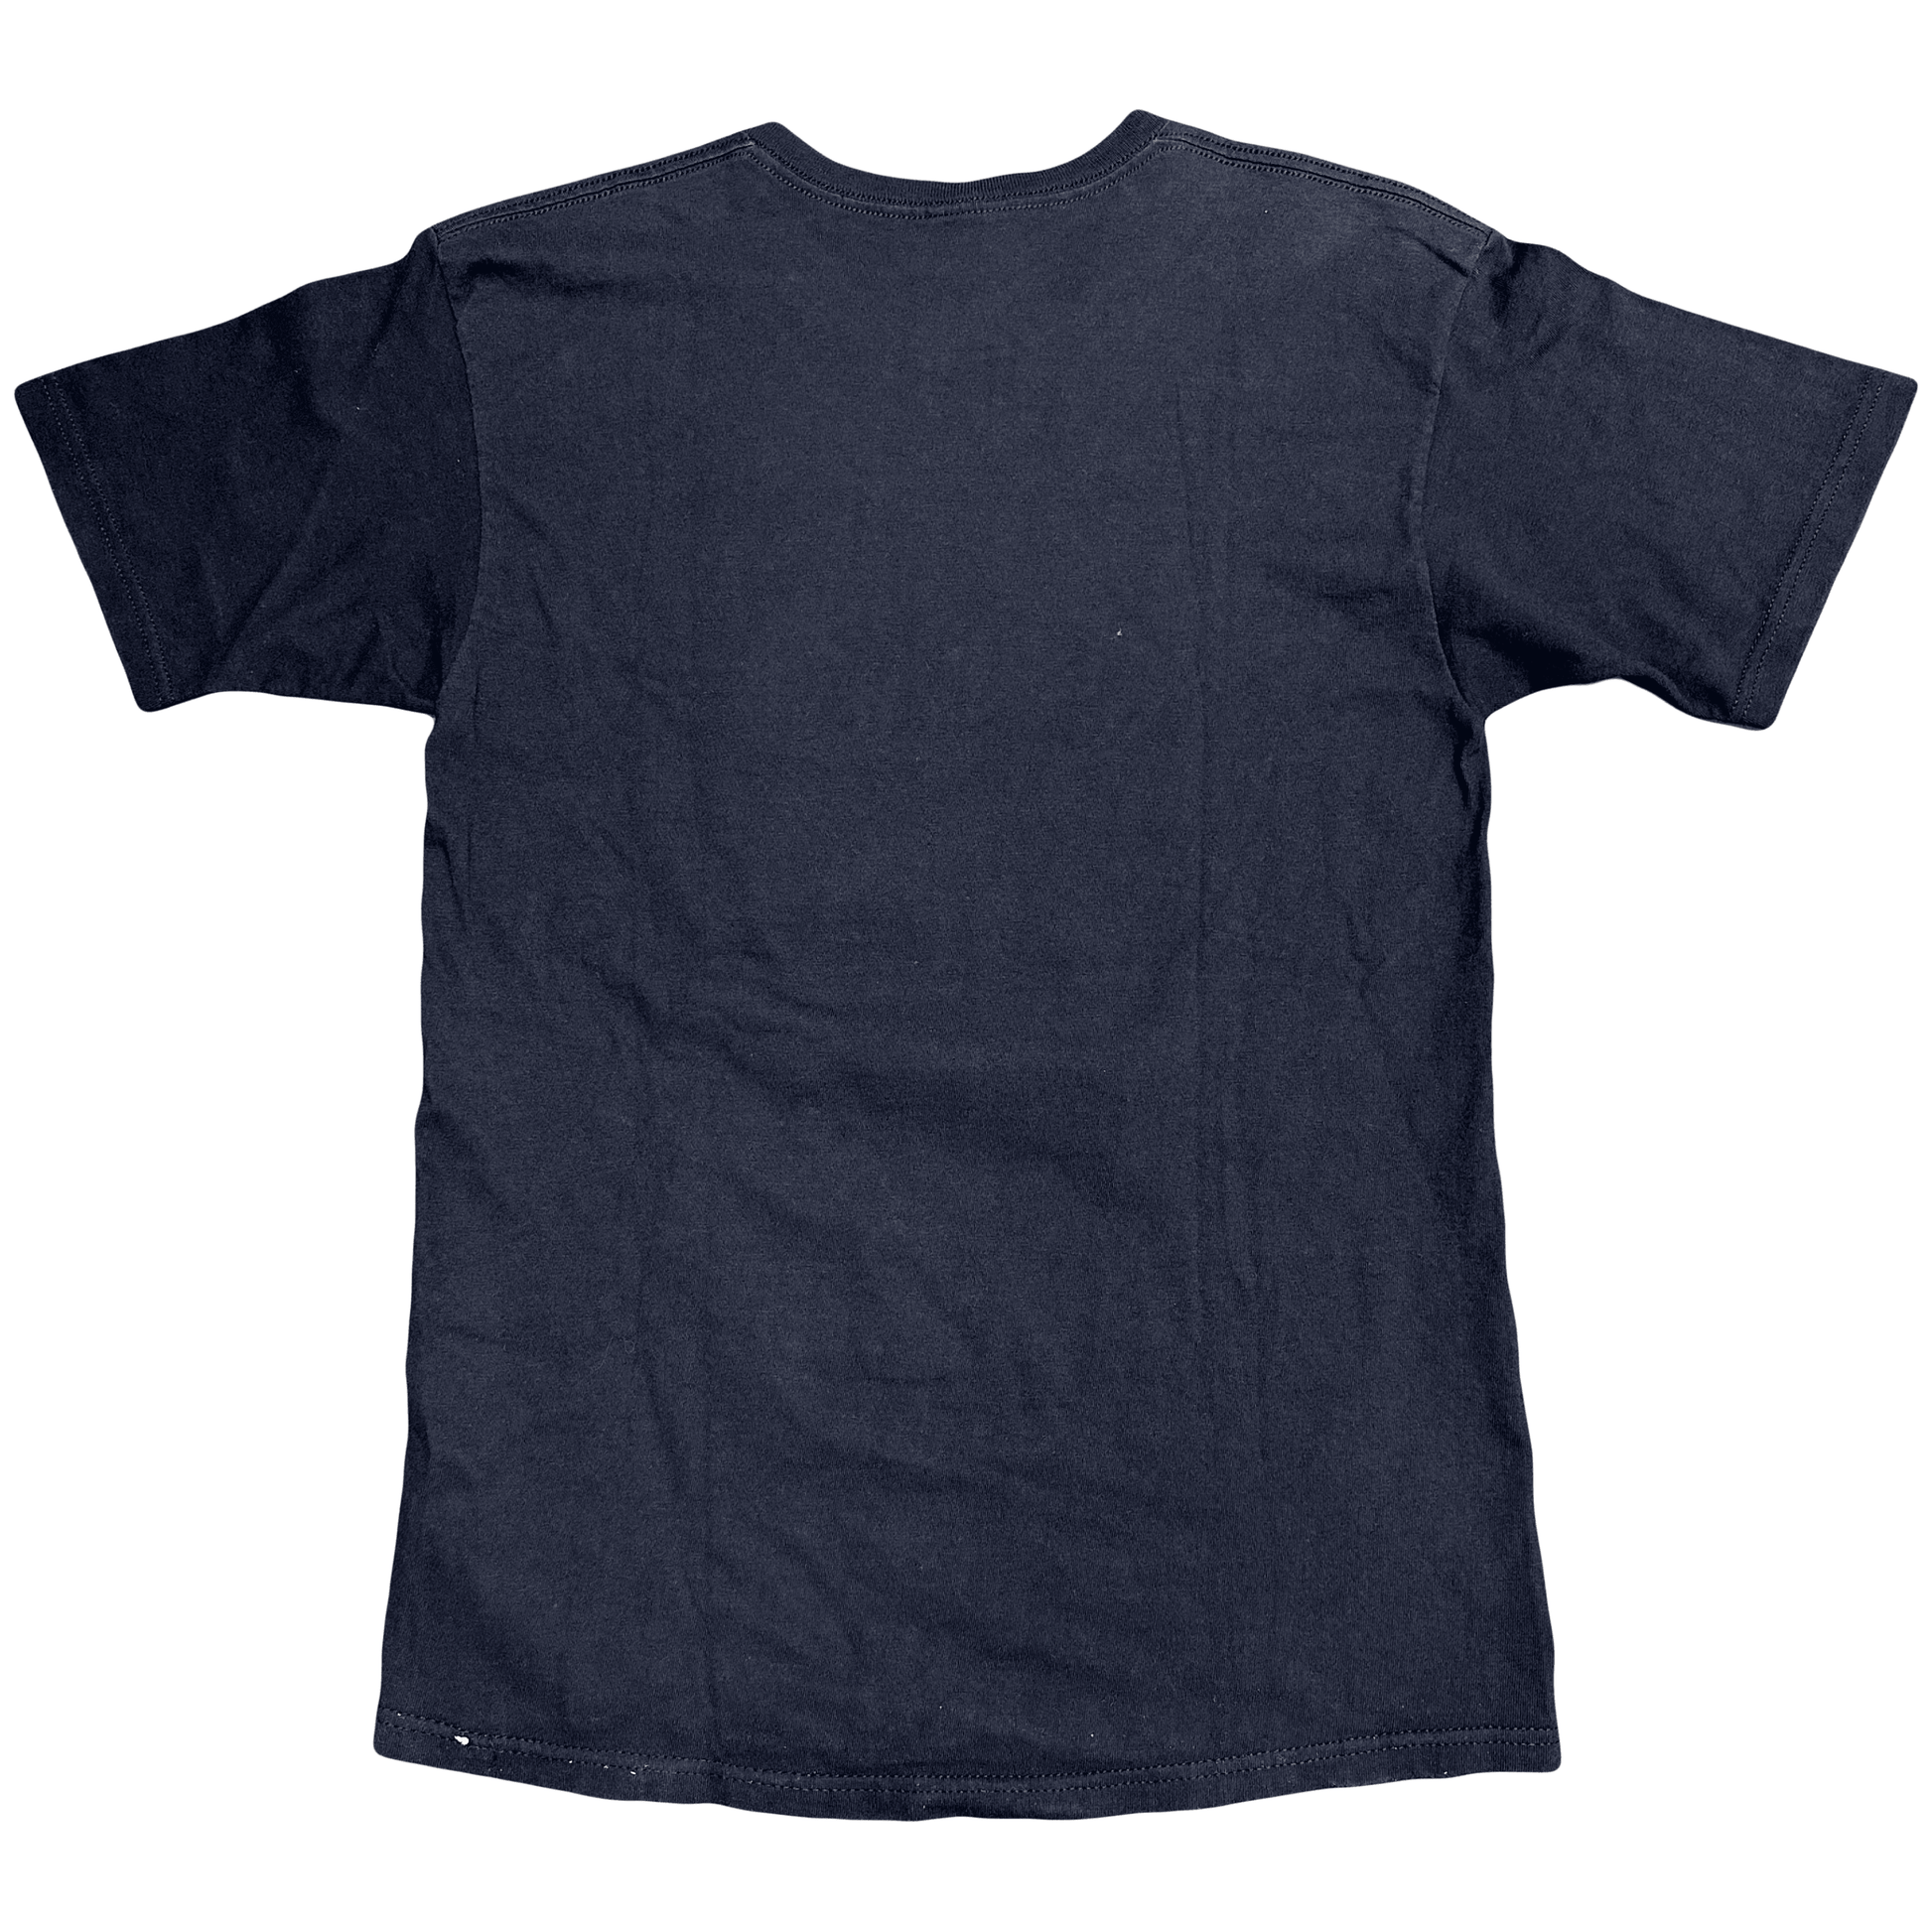 Stüssy Spellout T-Shirt In Navy ( M ) - Known Source